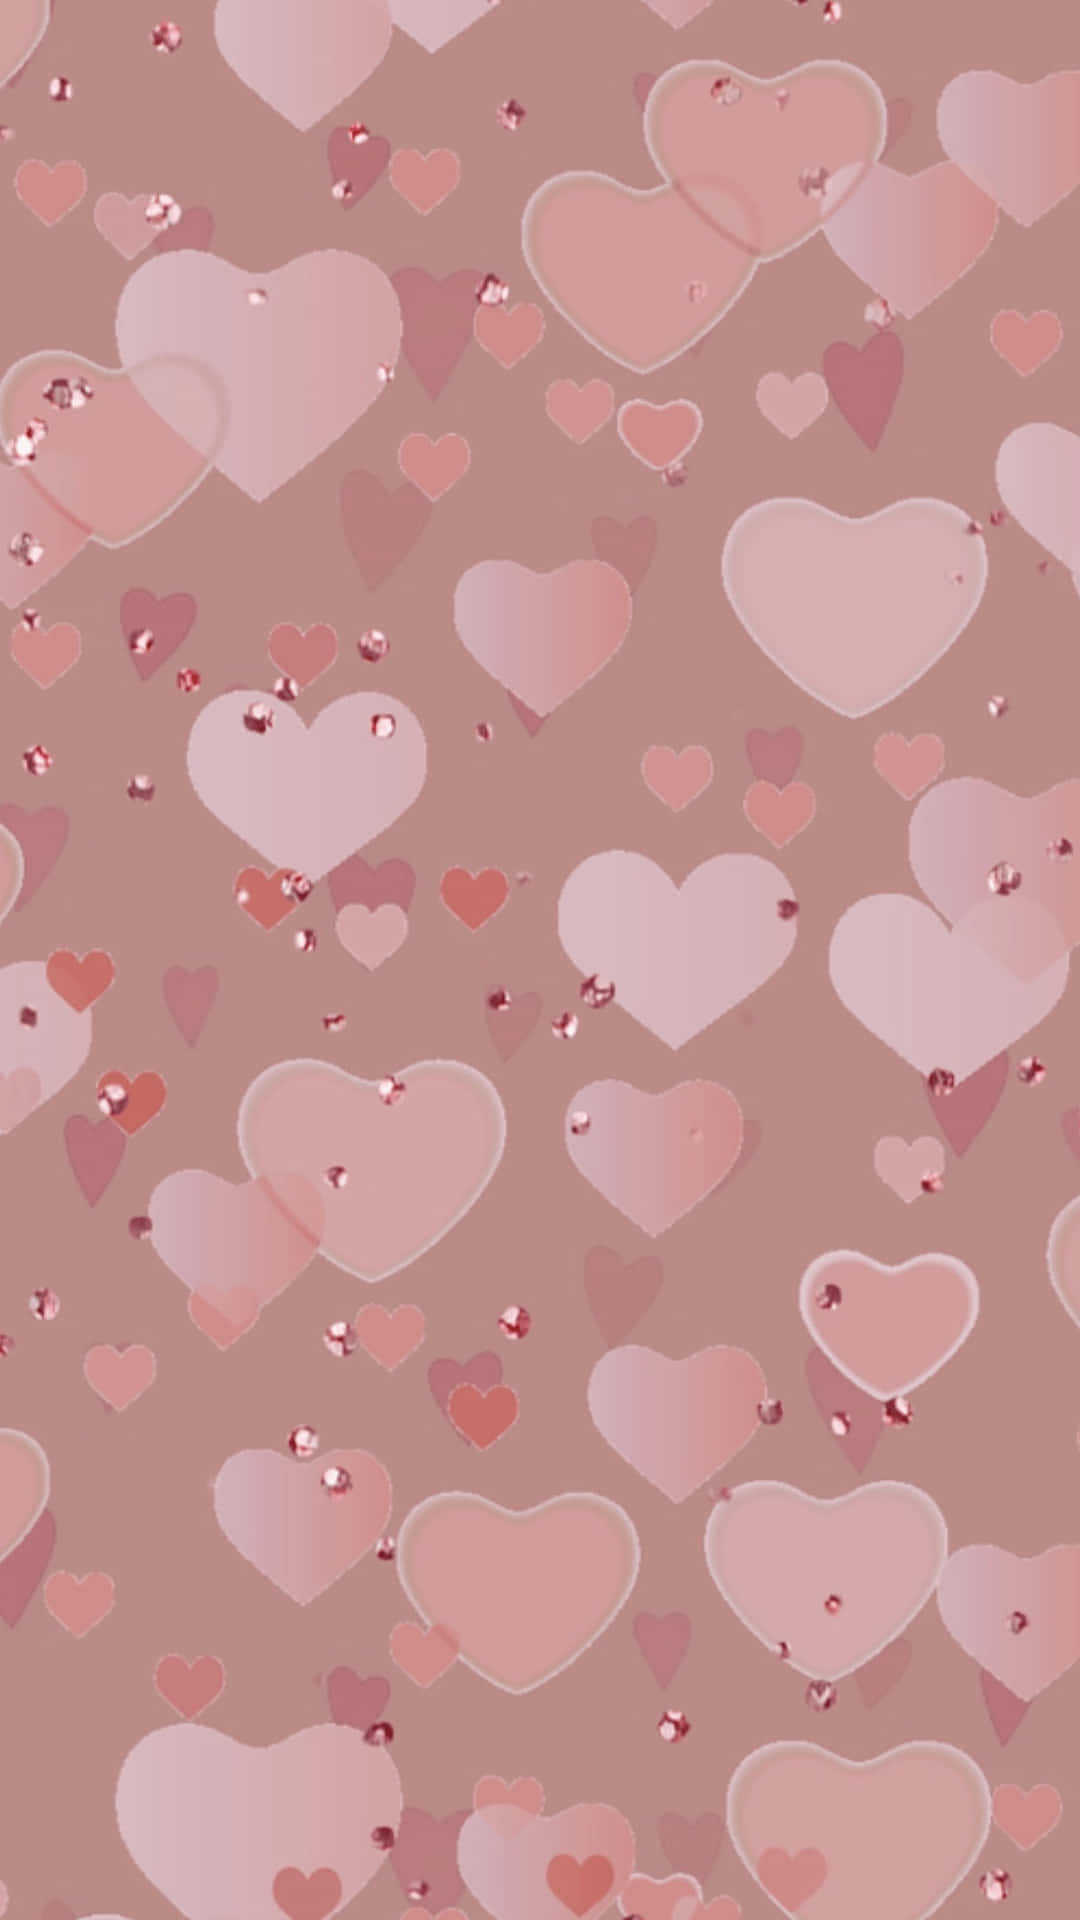 Cute hearts pattern in pink and purple tones Wallpaper